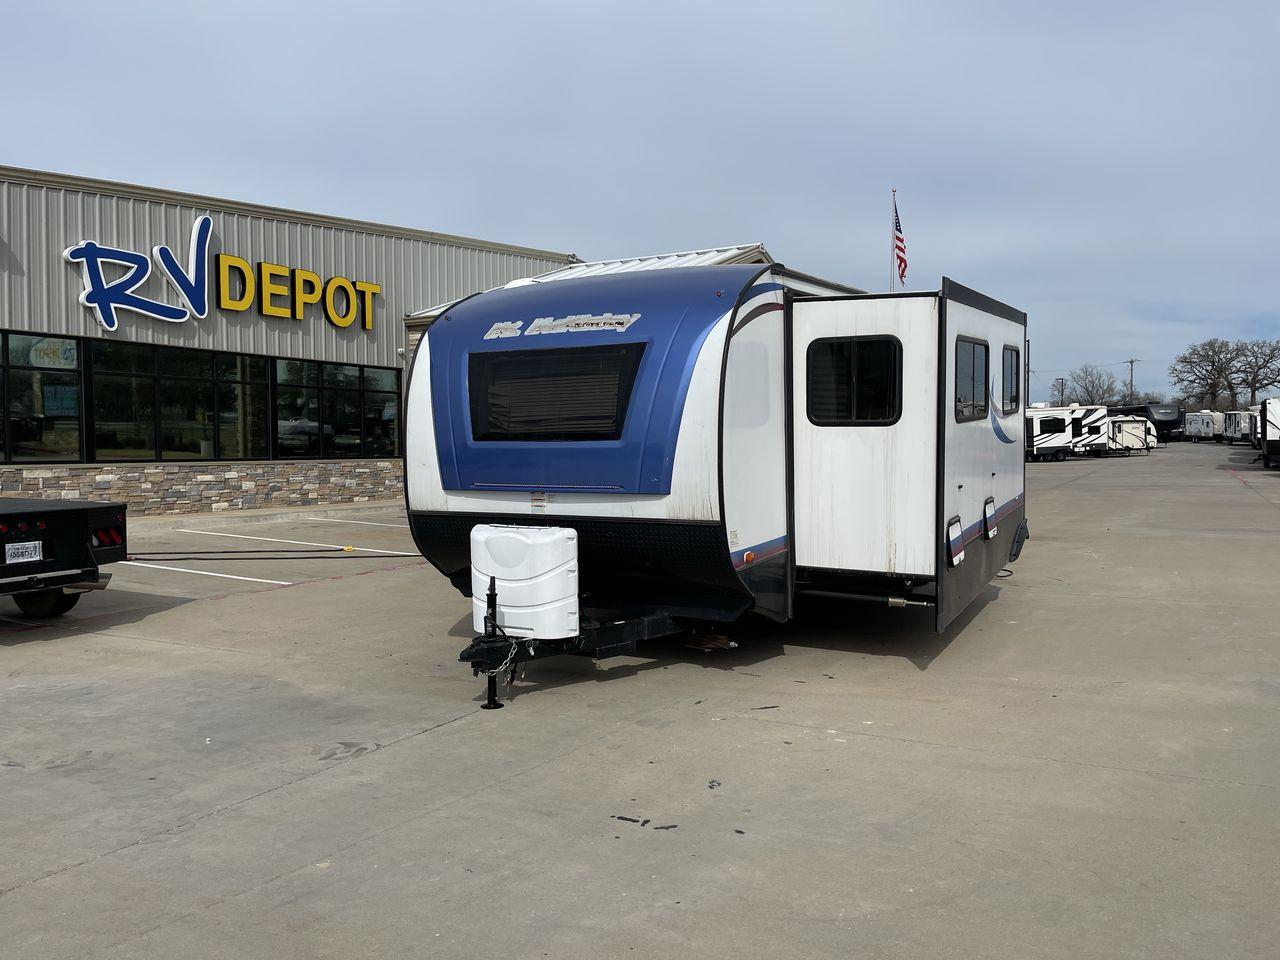 2018 WHITE MT MCKINLEY 830FK (59CCC3221JL) , Length: 32 ft | Dry Weight: 5,660 lbs. | Slides: 1 transmission, located at 4319 N Main St, Cleburne, TX, 76033, (817) 678-5133, 32.385960, -97.391212 - Take the 2018 Mt. McKinley 830FK Travel Trailer on your upcoming journey. This travel trailer provides a well-thought-out living area for your outdoor adventures, all while being tailored for comfort and convenience. This unit measures 32 ft in length by 8 ft in width. It has a dry weight of 5,66 - Photo #0